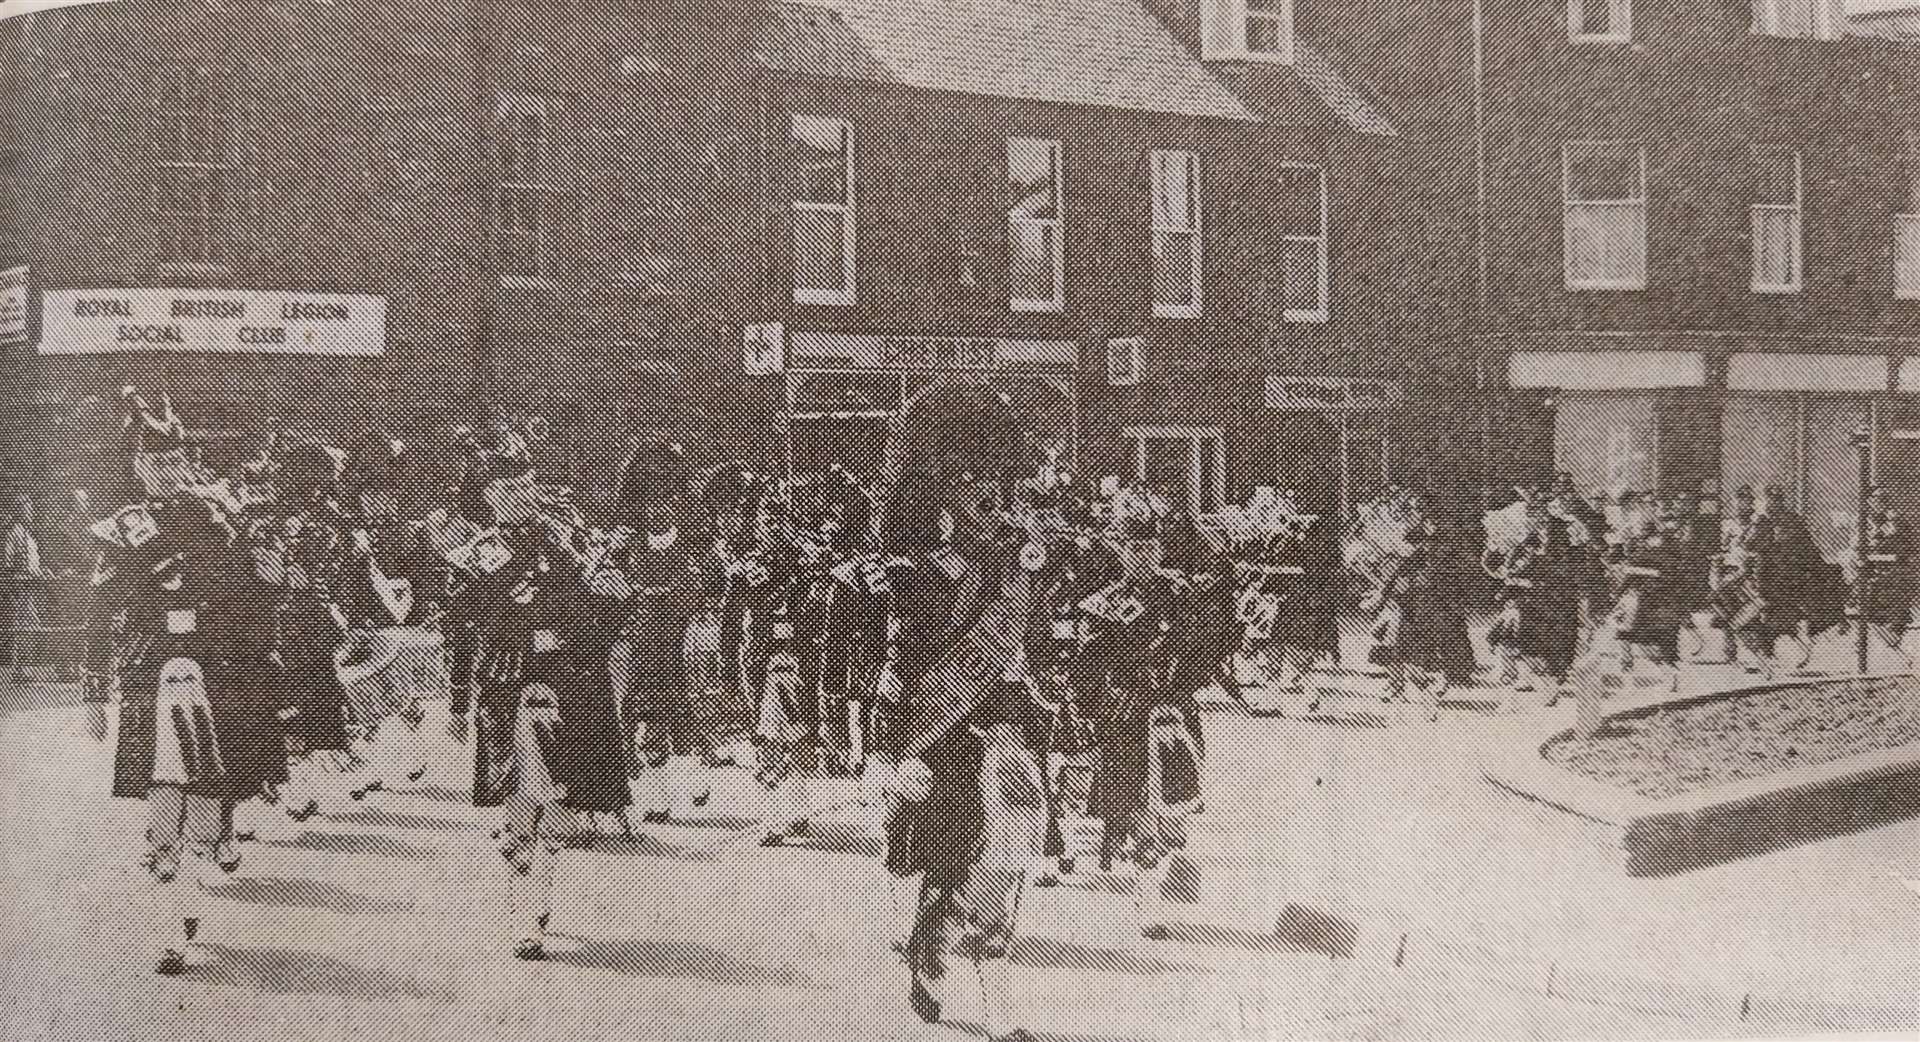 The Gordon Highlanders made a surprise appearance, parading through Turriff town centre. (Turriff Advertiser 1988)